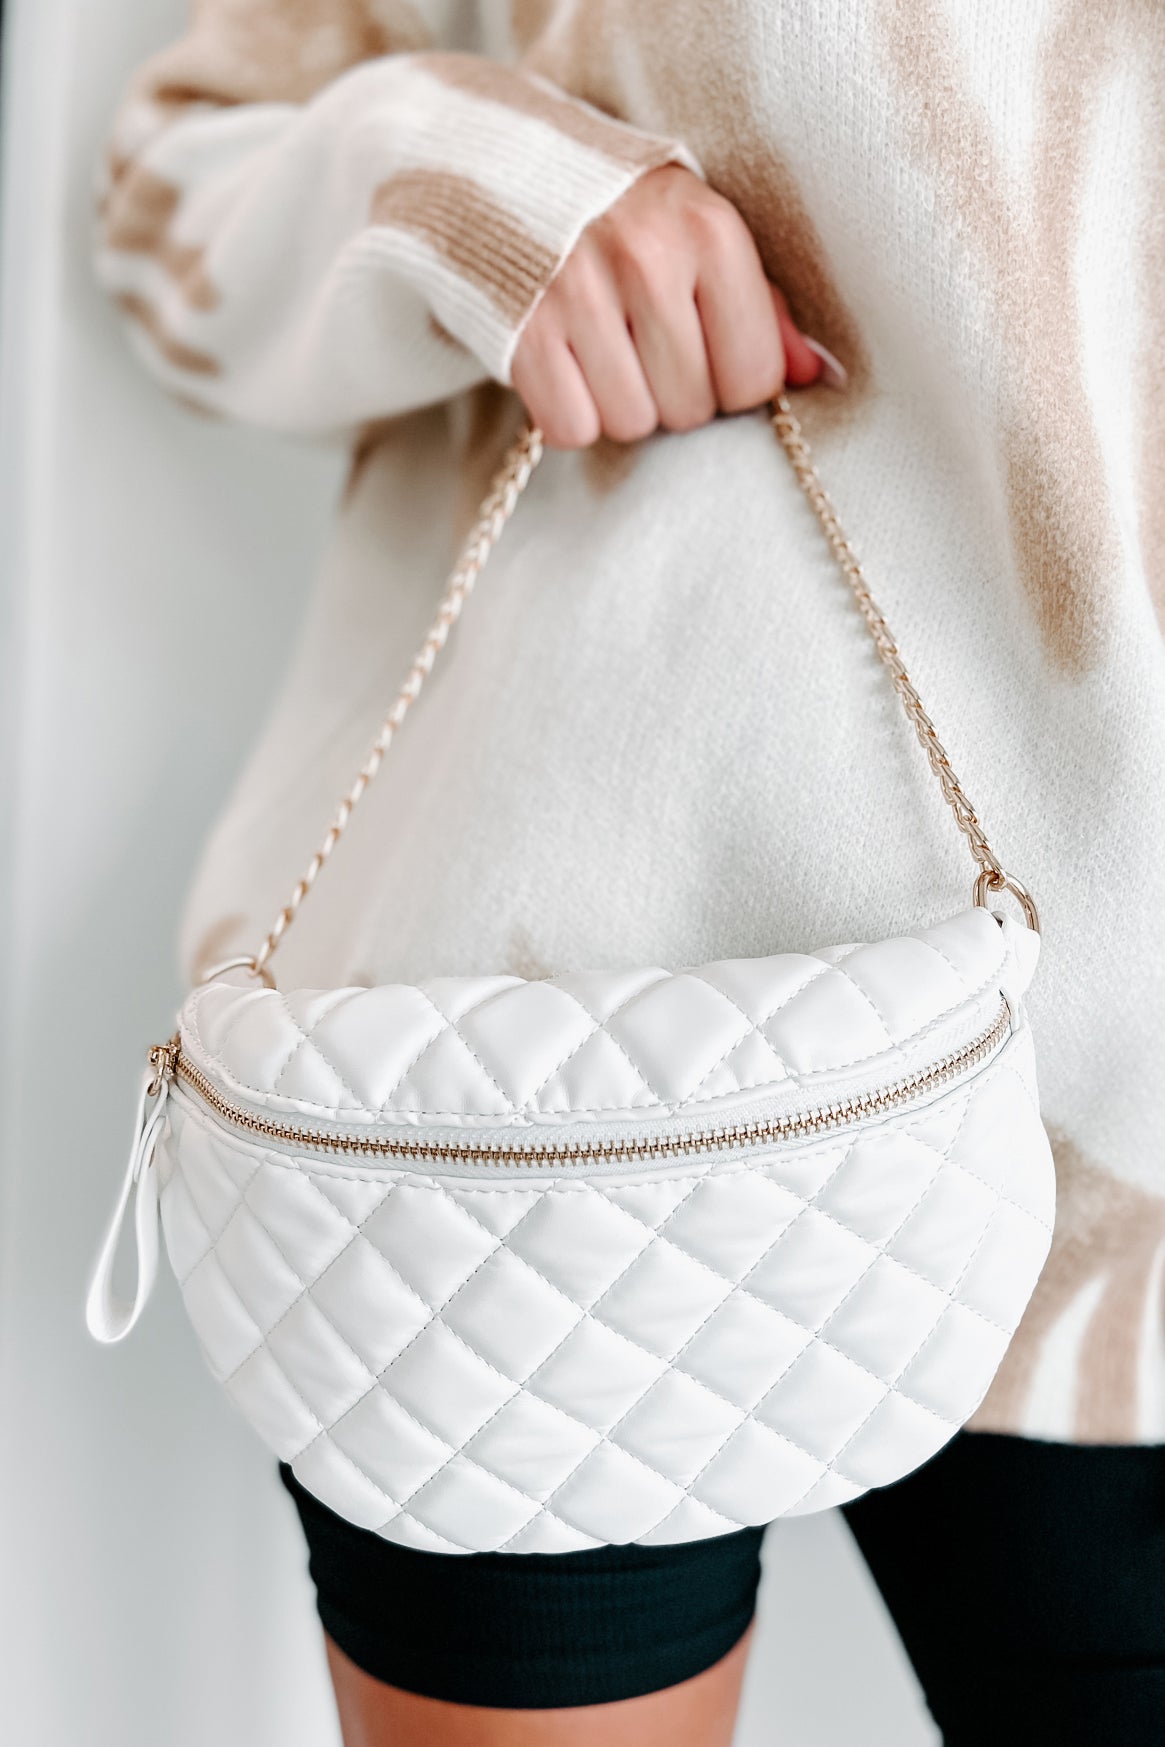 Quilted Bum Bag